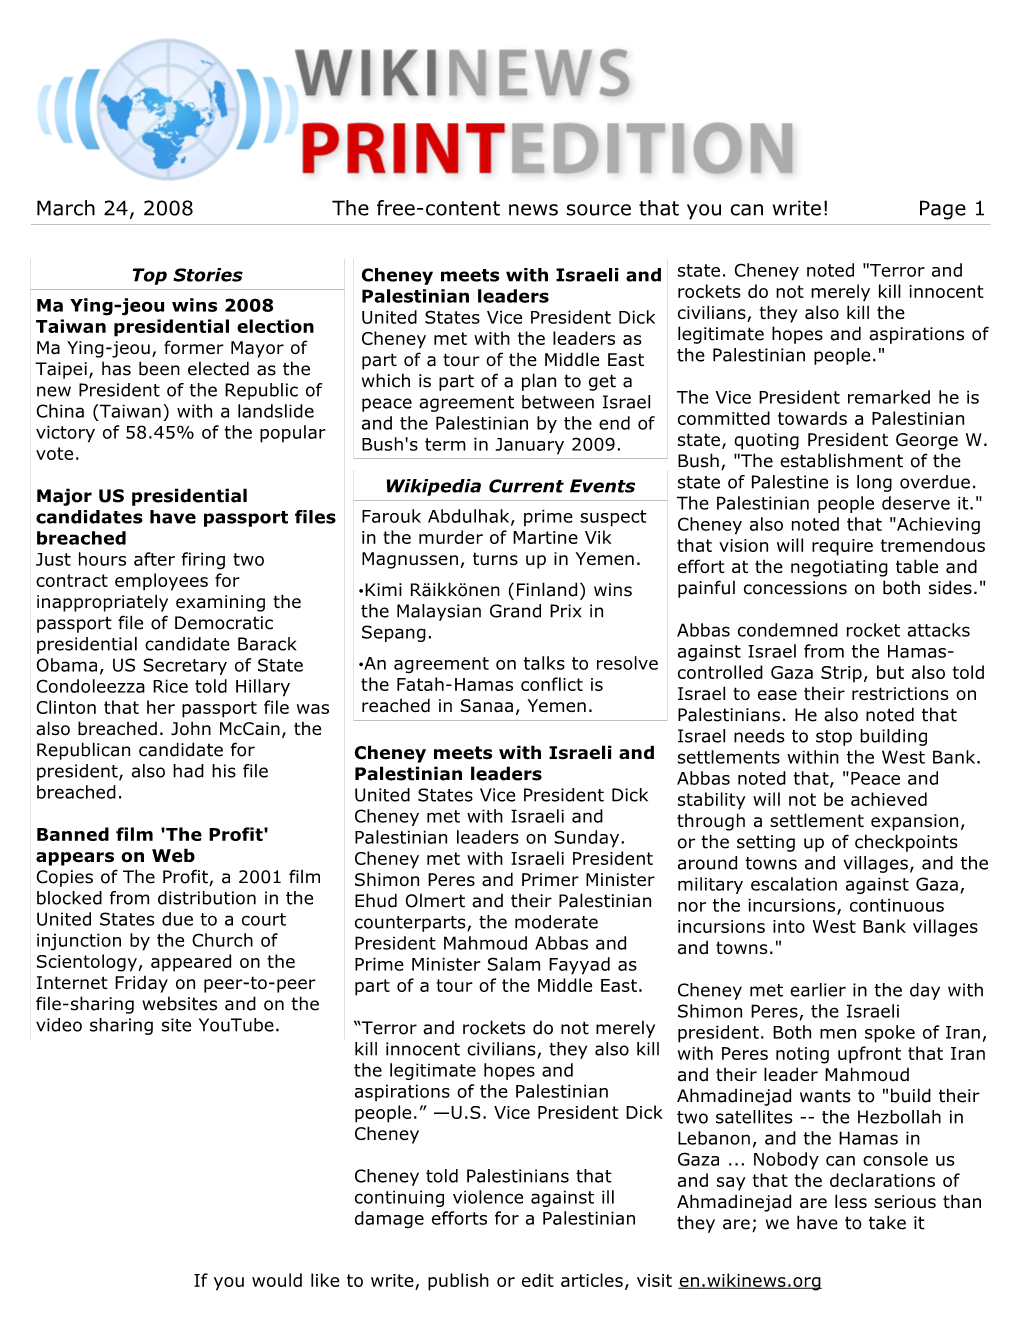 March 24, 2008 the Free-Content News Source That You Can Write! Page 1